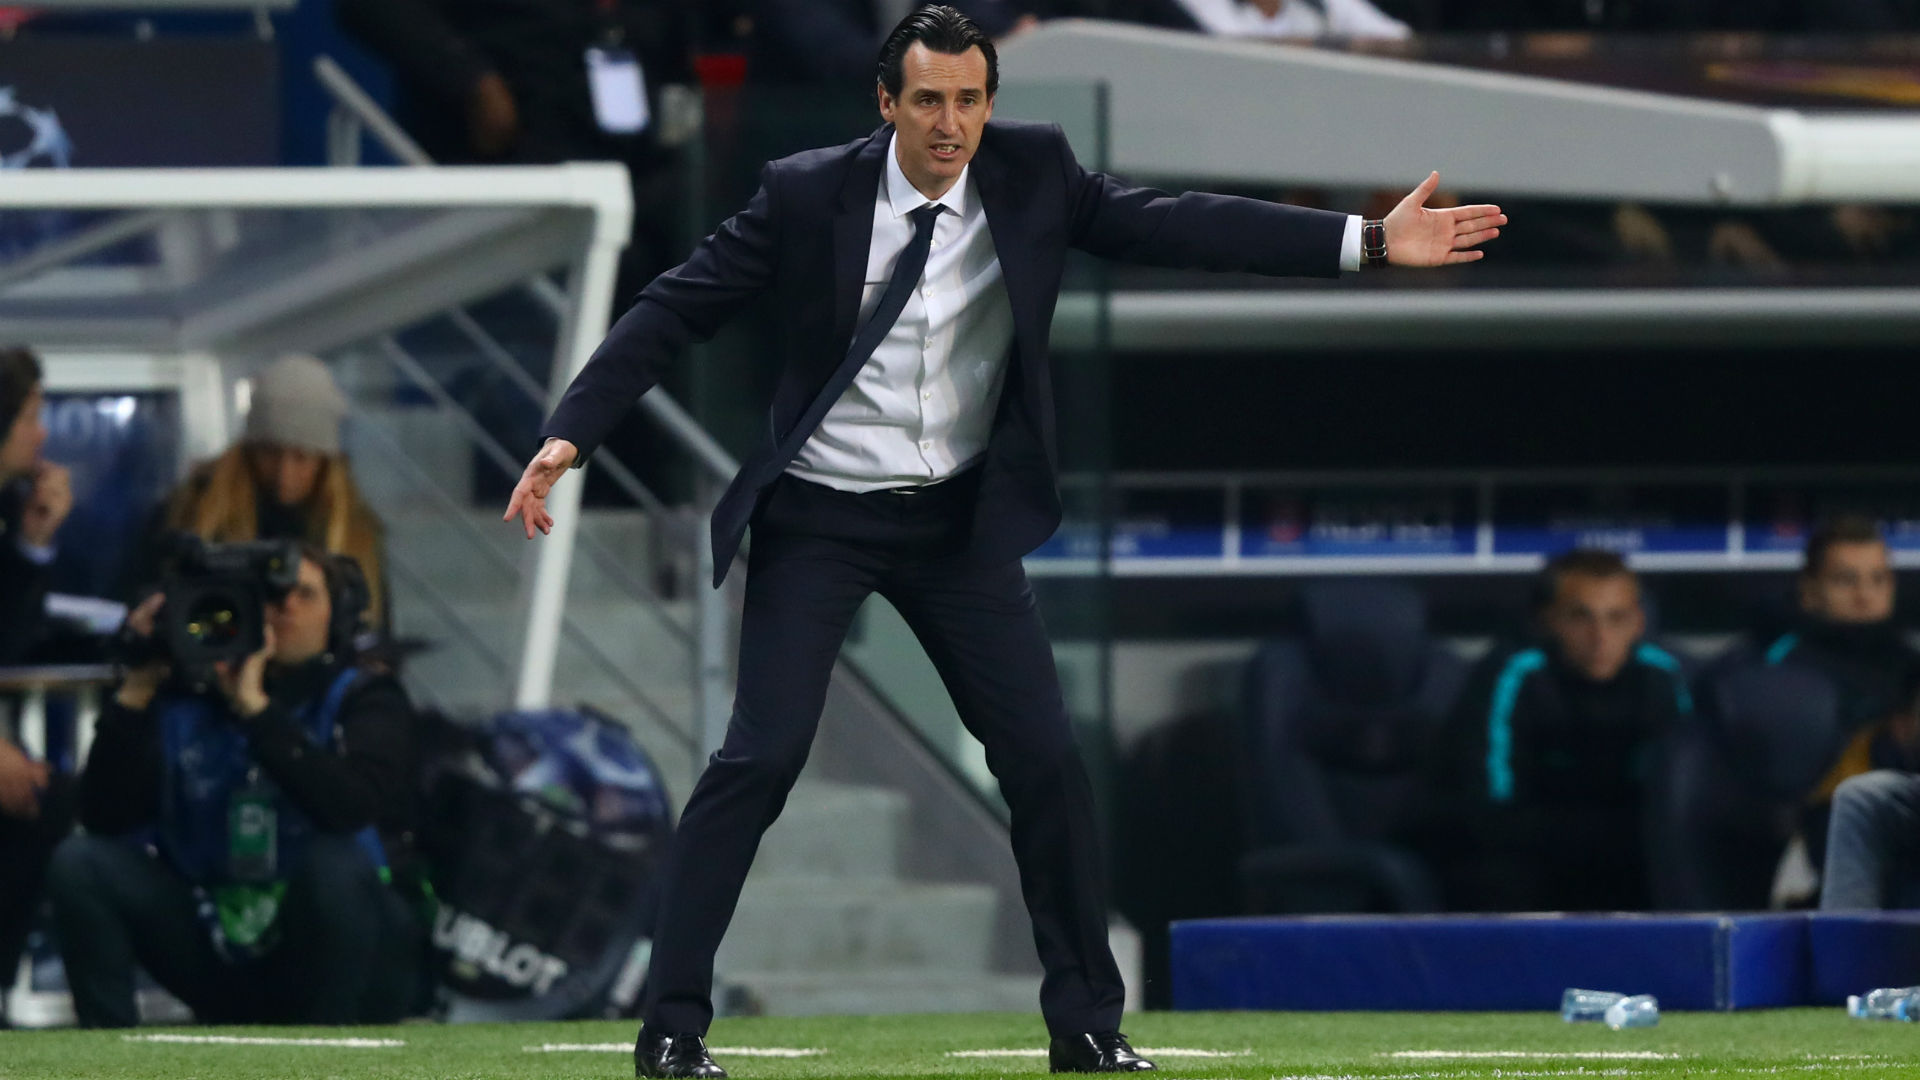 It's good to talk – Emery happy to chat with PSG players